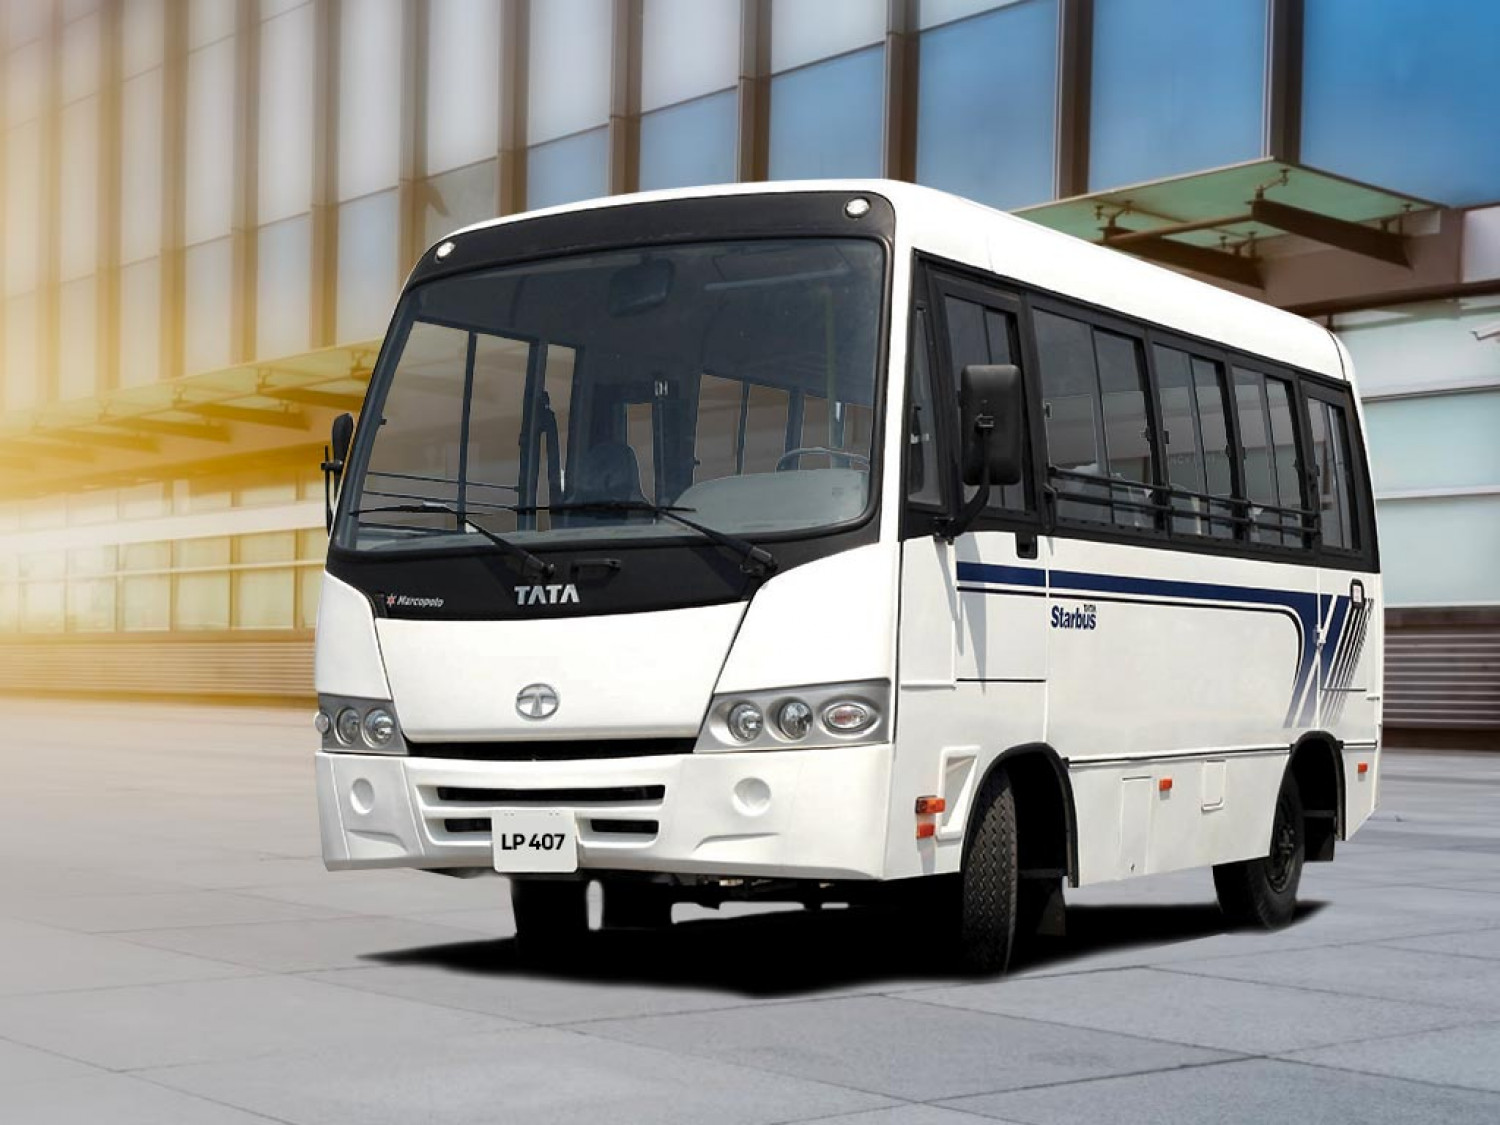 Tata LP 407 Buses | Reliable and Efficient Commercial Vehicles Infographic